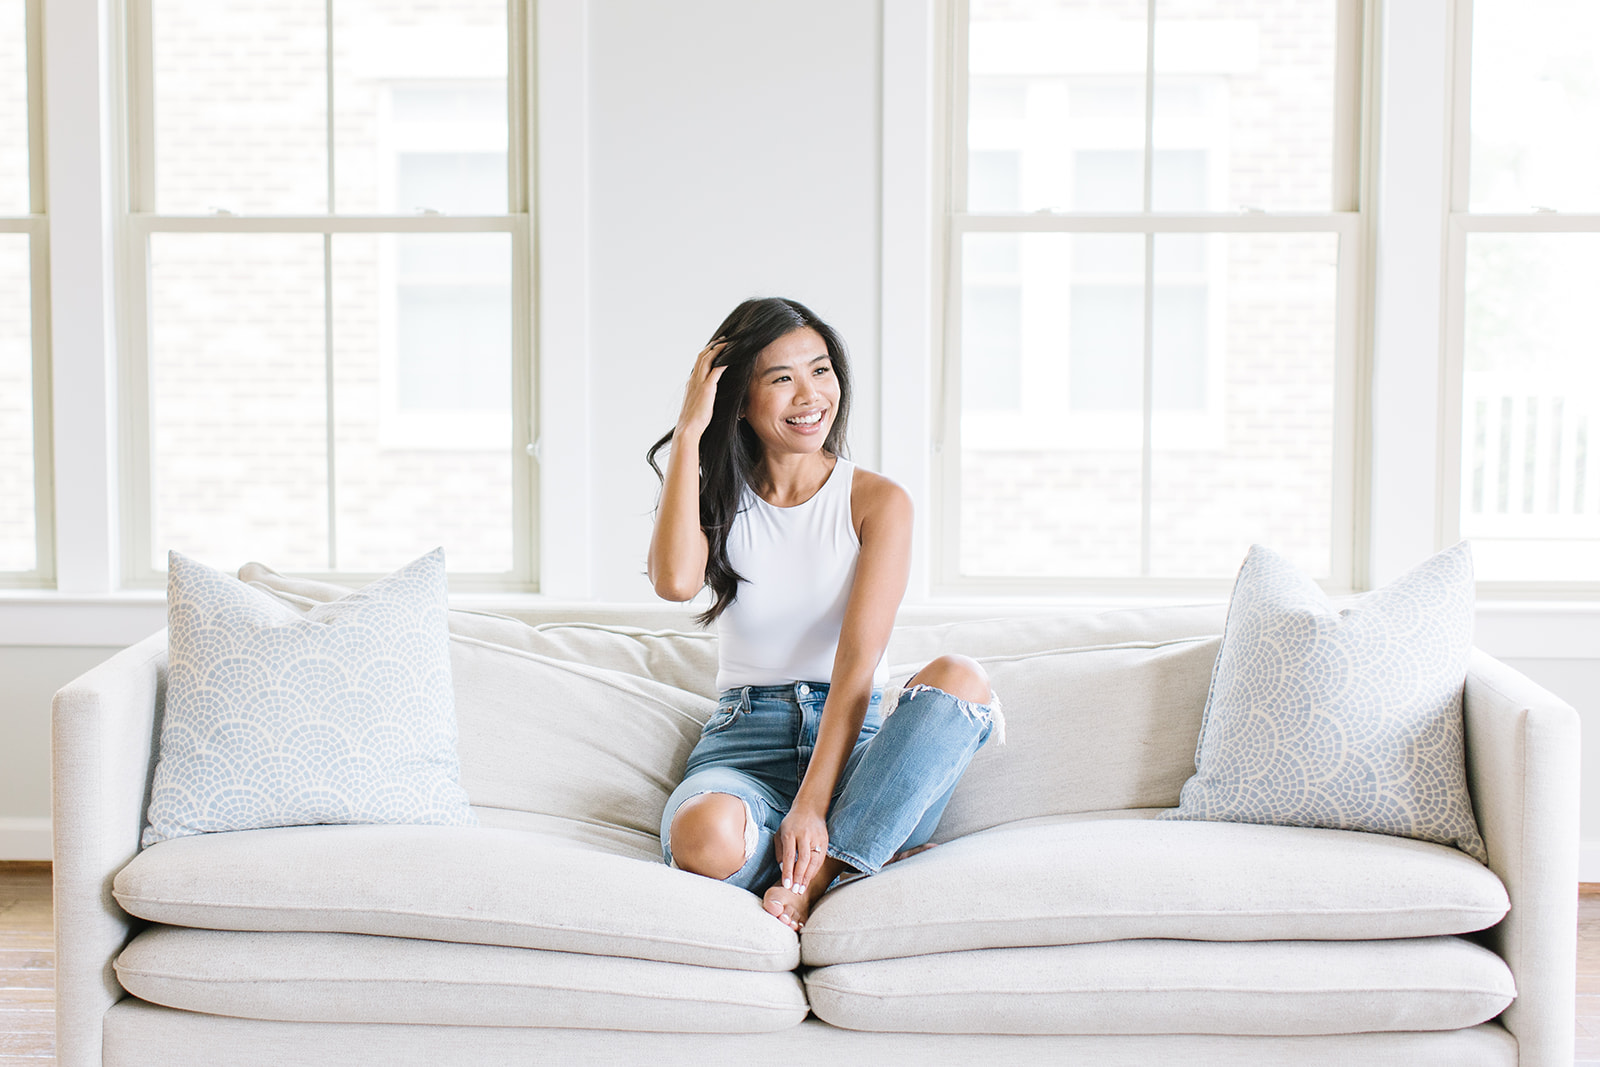 woman in a white sleeveless shirt and ripped jeans with her hand in her hair sitting on a couch Personal Branding Washington DC